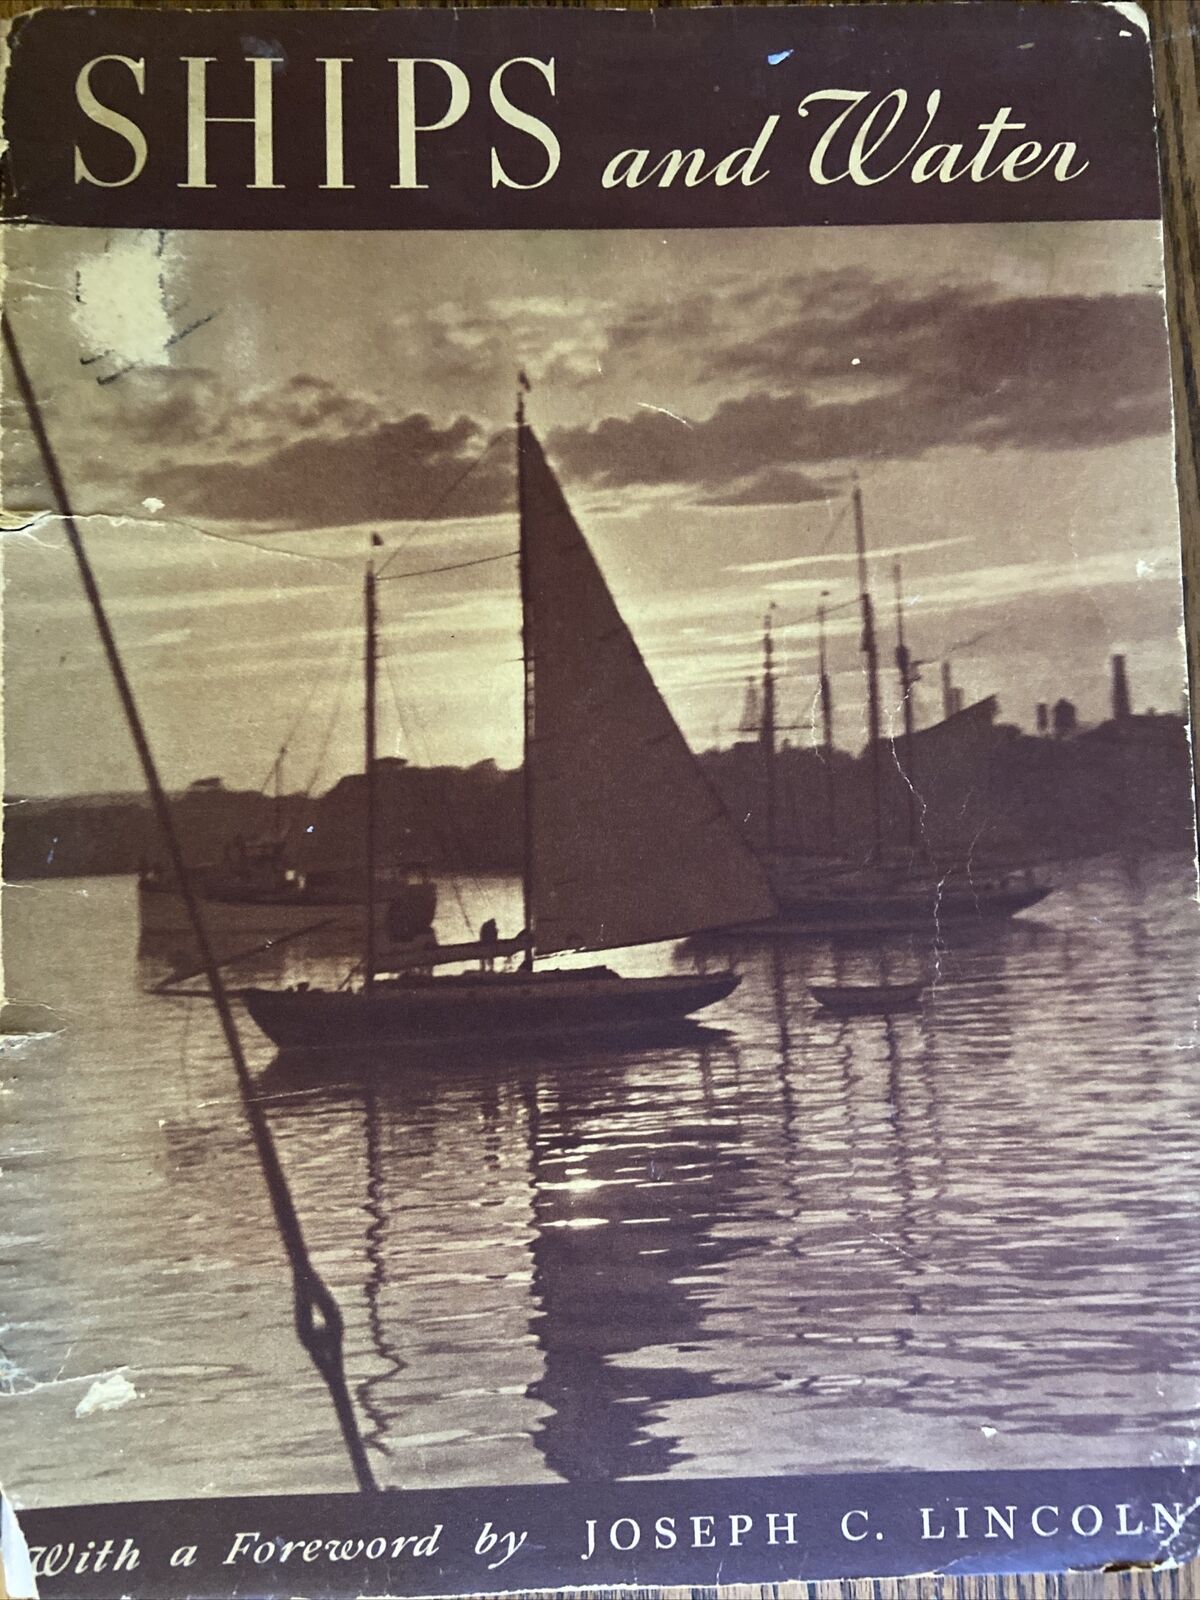 VERY RARE 1938 “SHIPS and Water” by VARIOUS PHOTOGRAPHERS of scenes around World